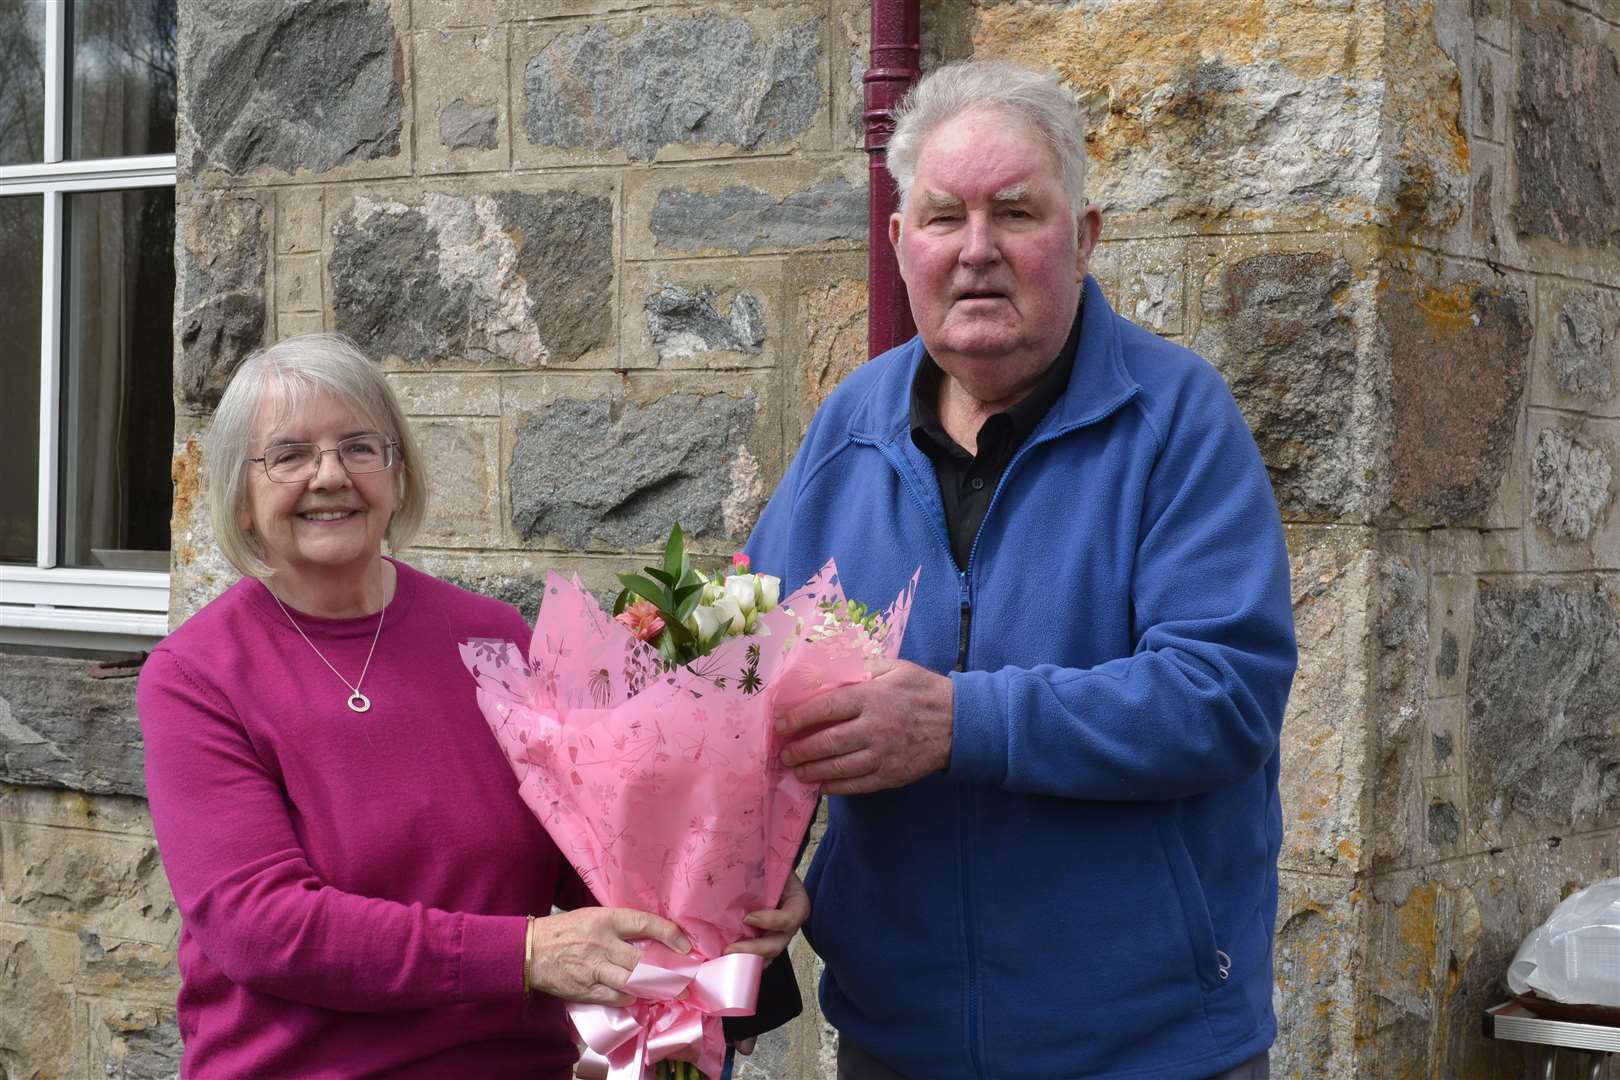 Morag Macleod, sub-postmistress at Strathnaver Post office for the last 37 years, receives a bouquet of flowers from her next door neighbour, eighty-five year old Ian (Inshlampie) Mackay. Picture: Jim A Johnston